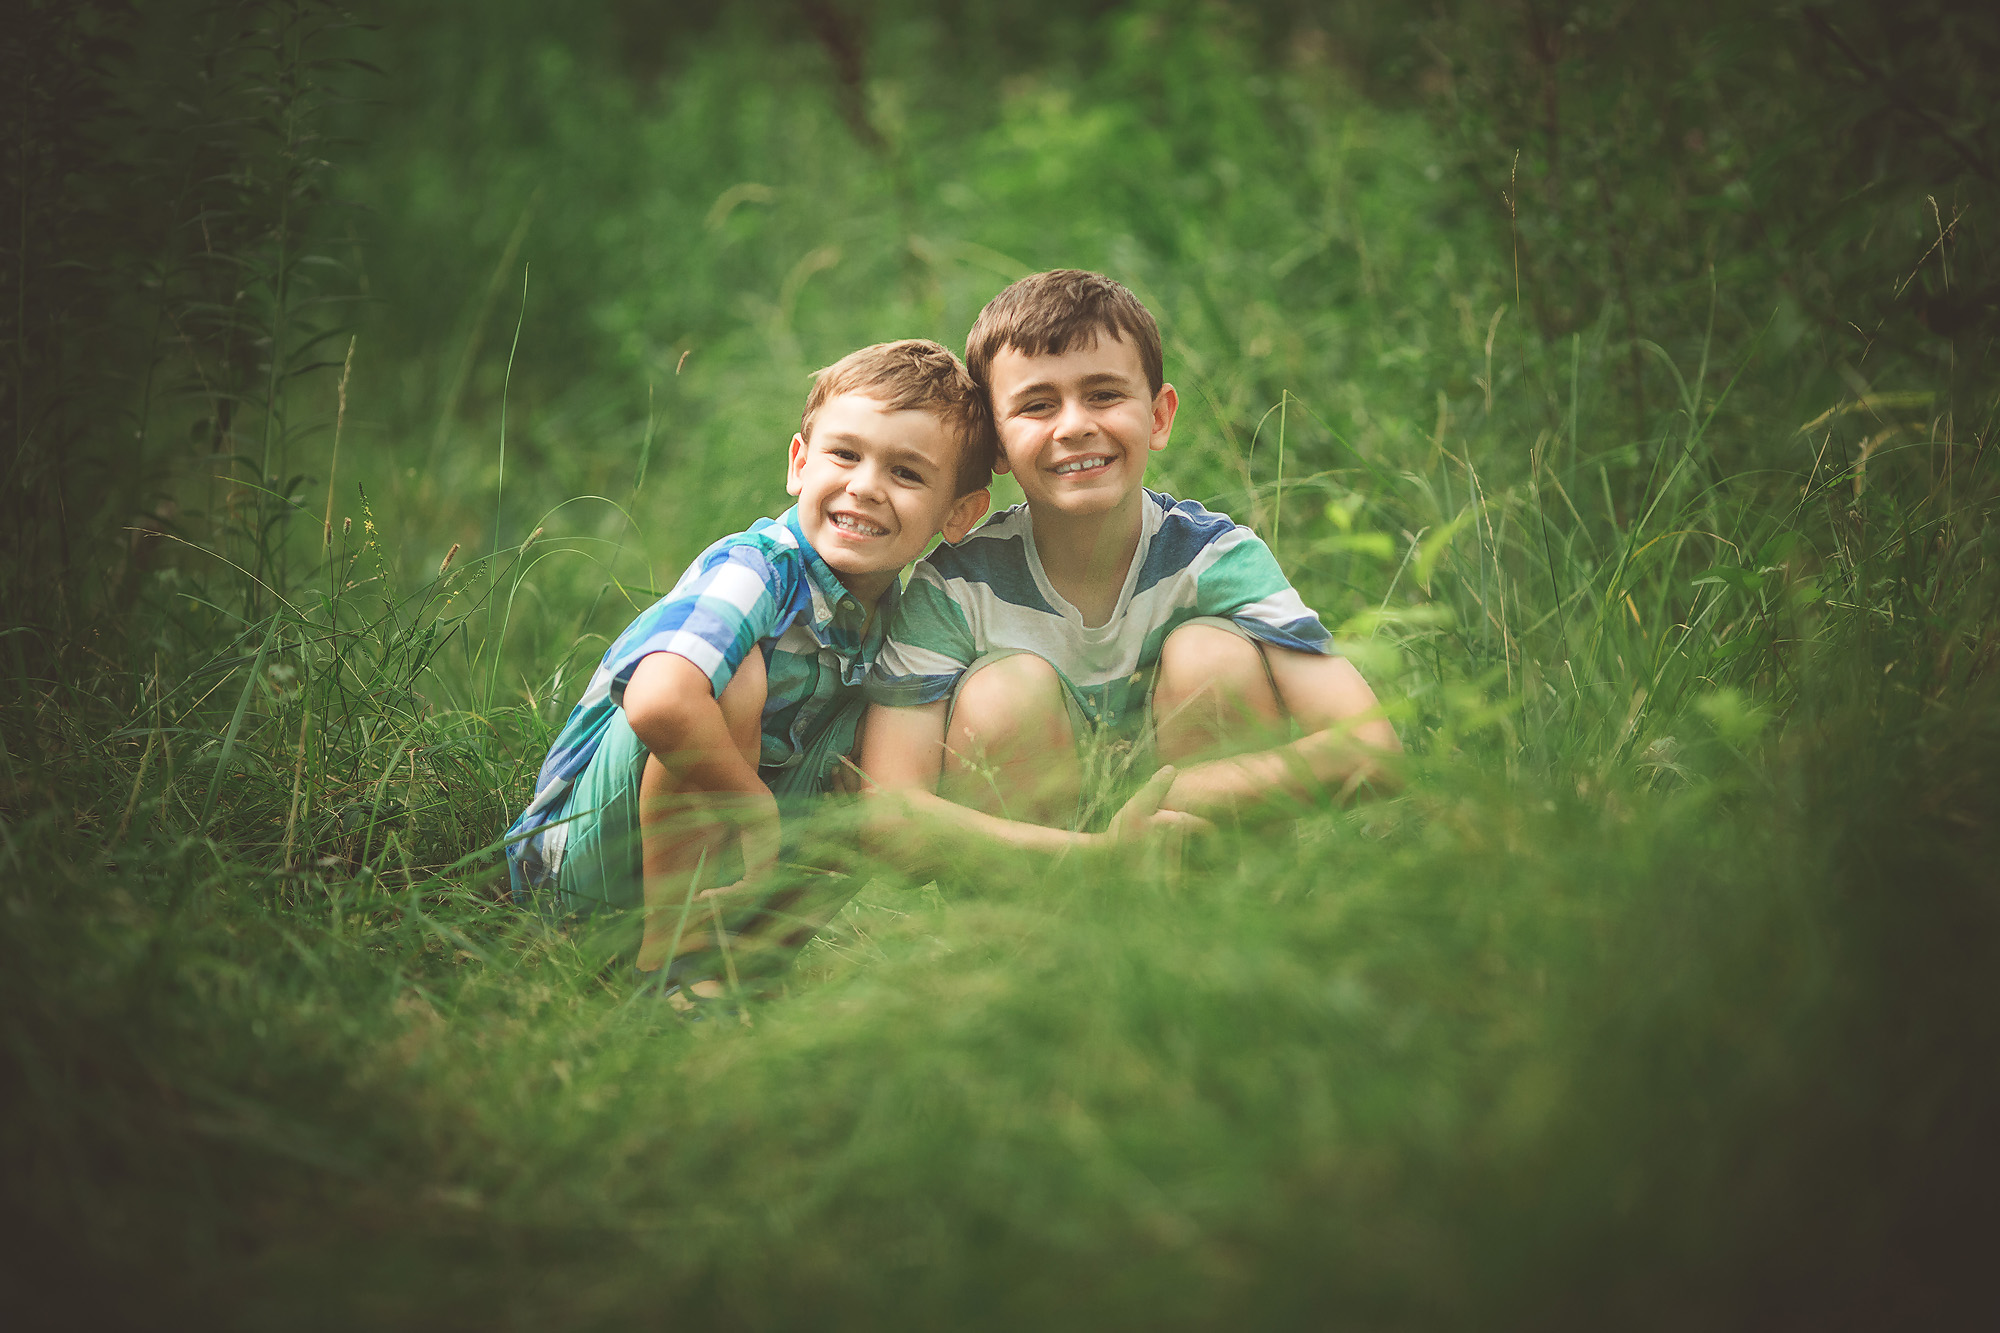 brothers portrait in grass